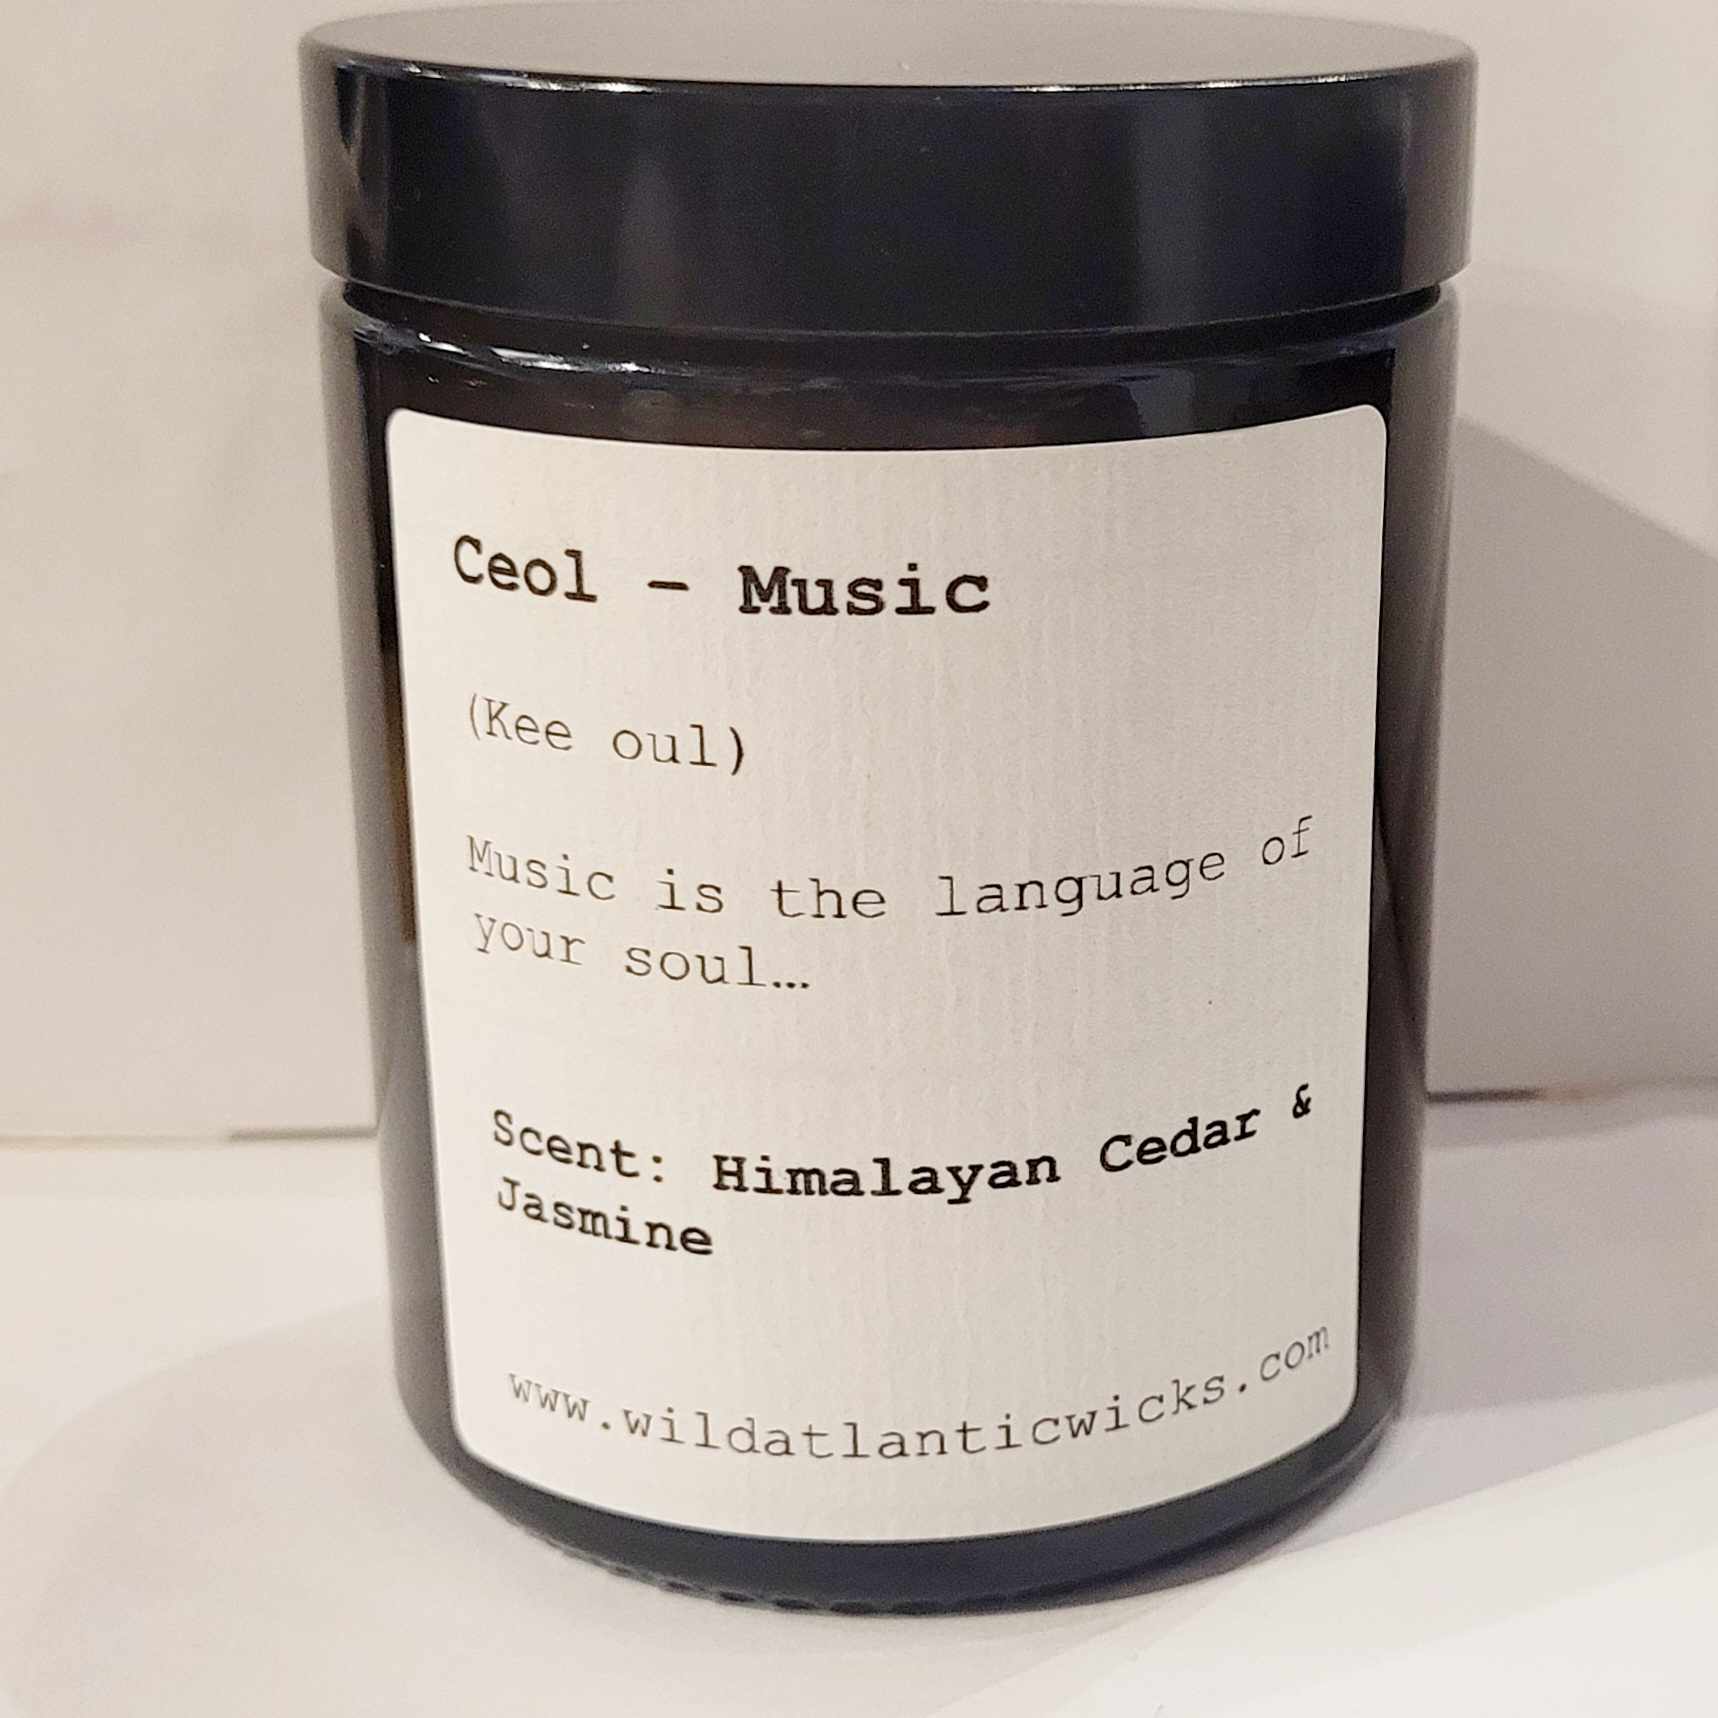 Ceol - Music Candle by Wild Atlantic Wicks